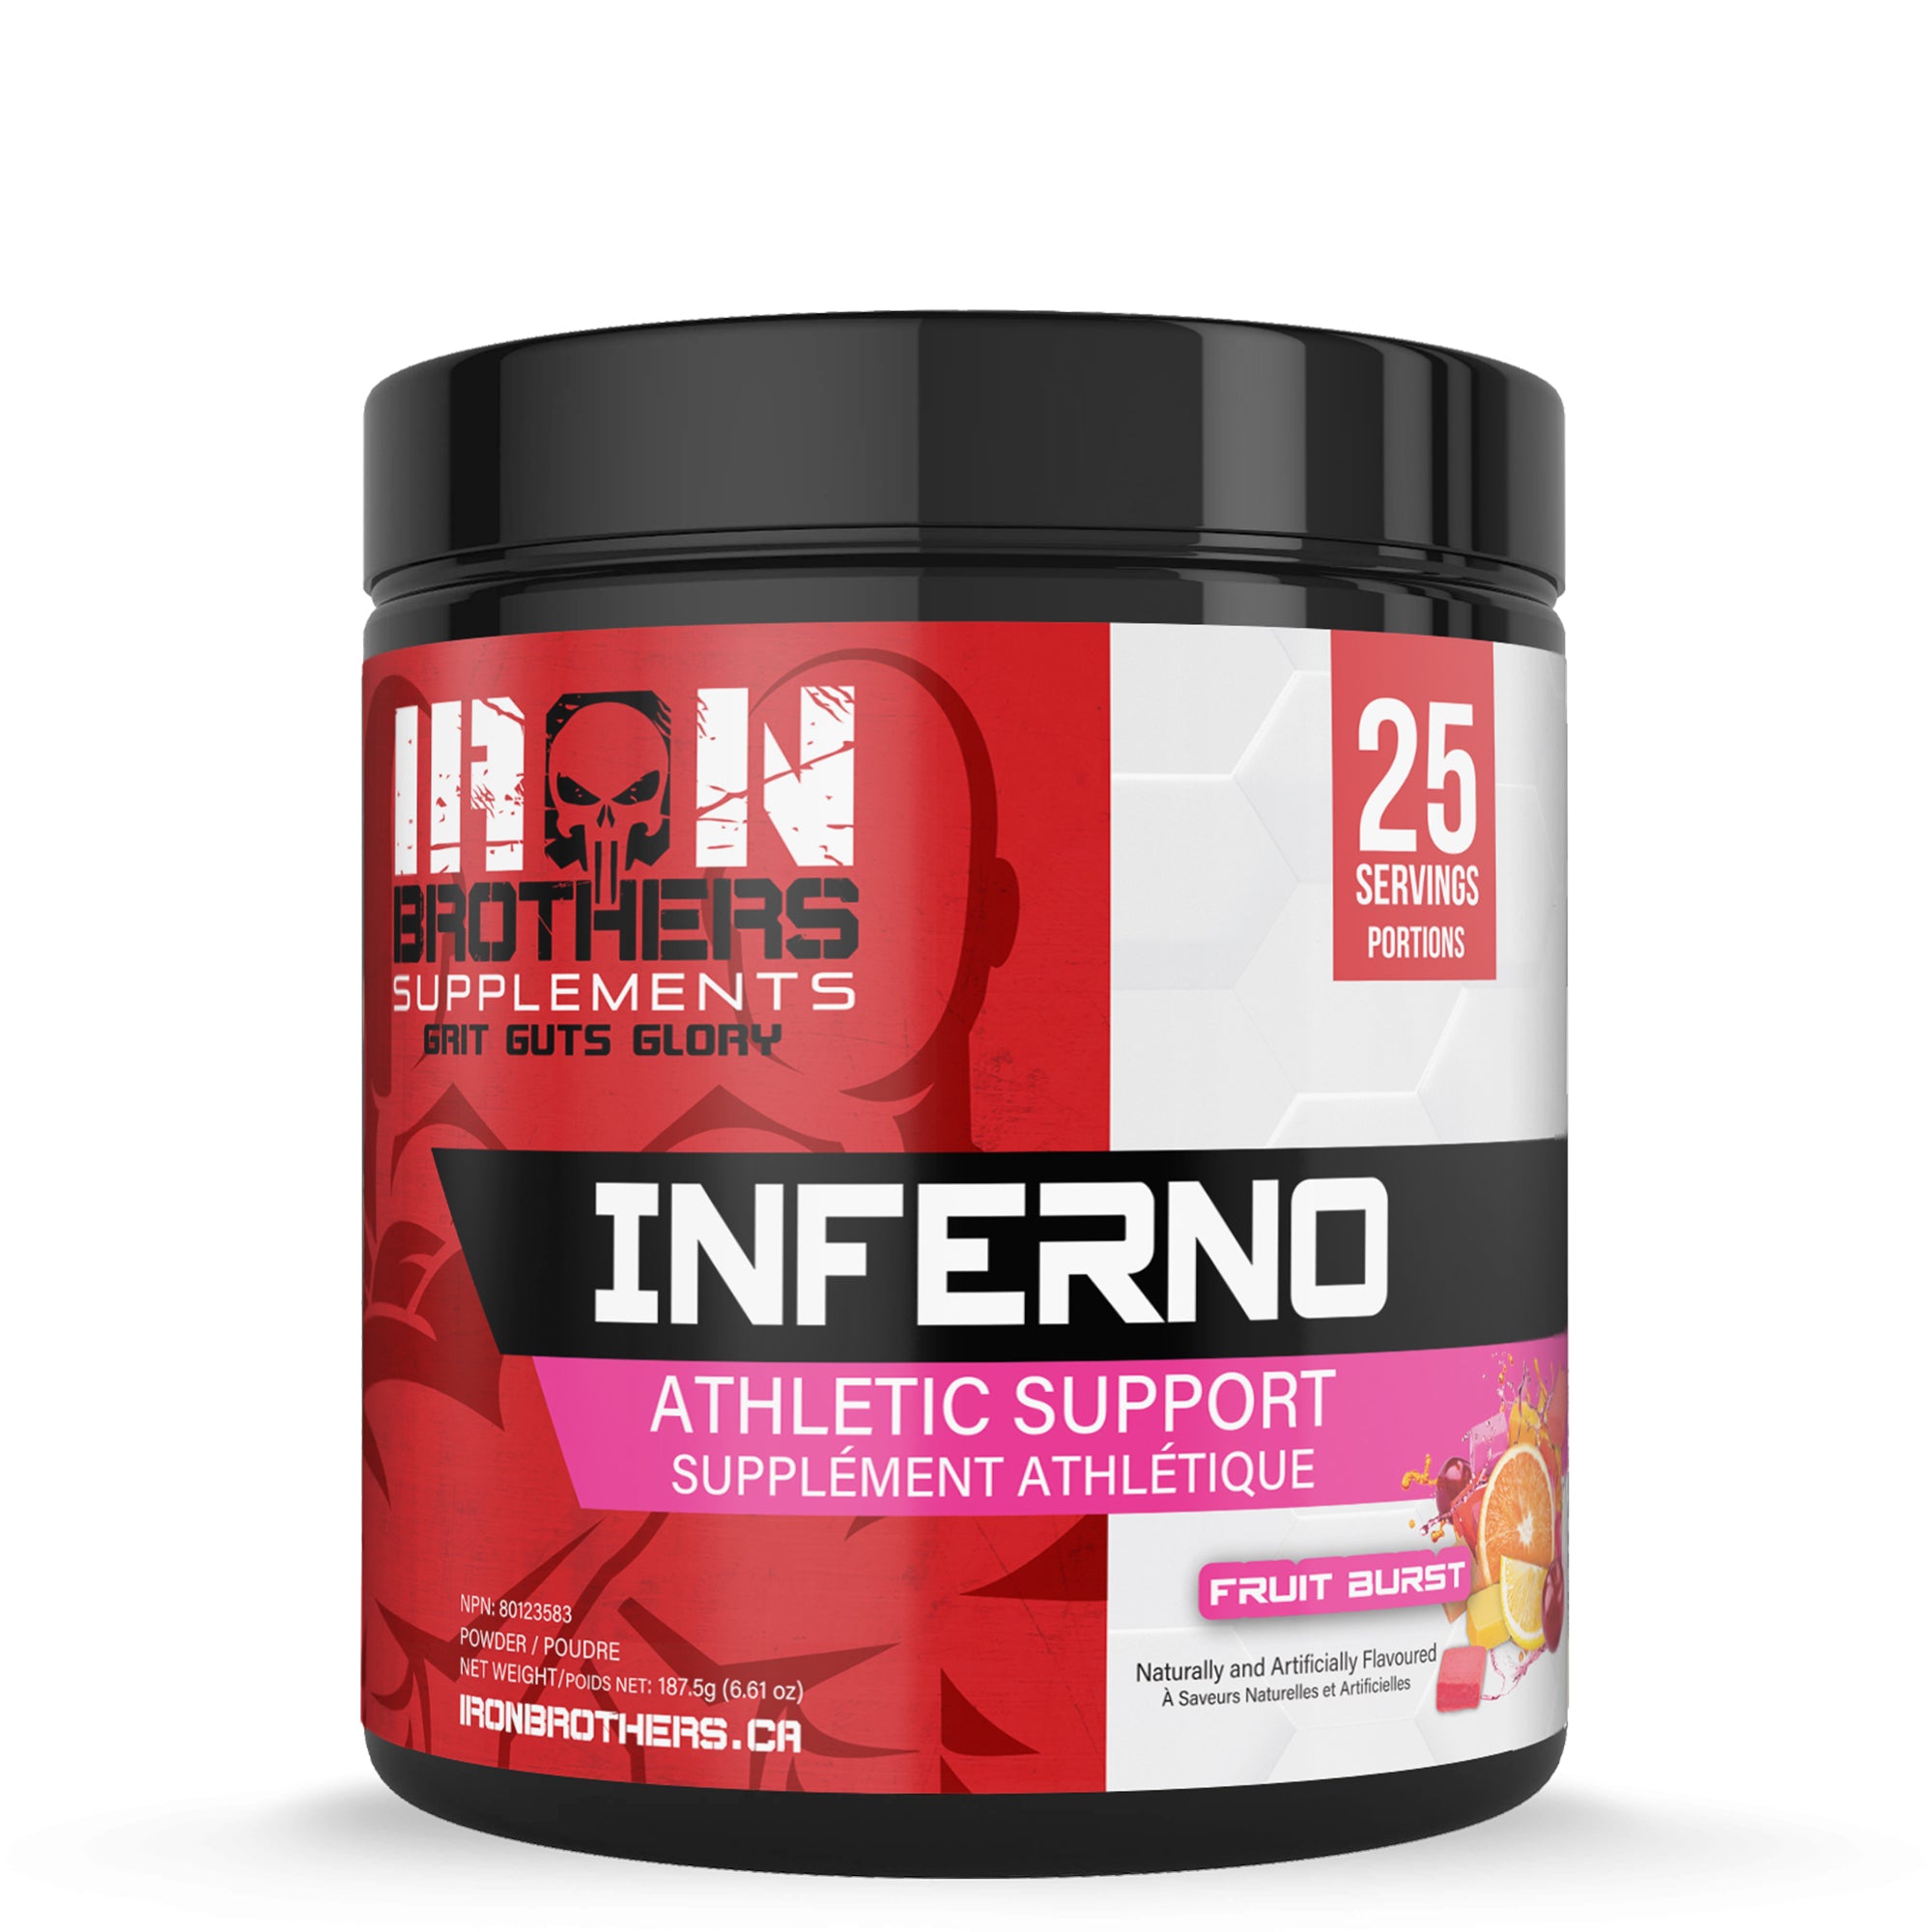 Inferno - Athletic Support